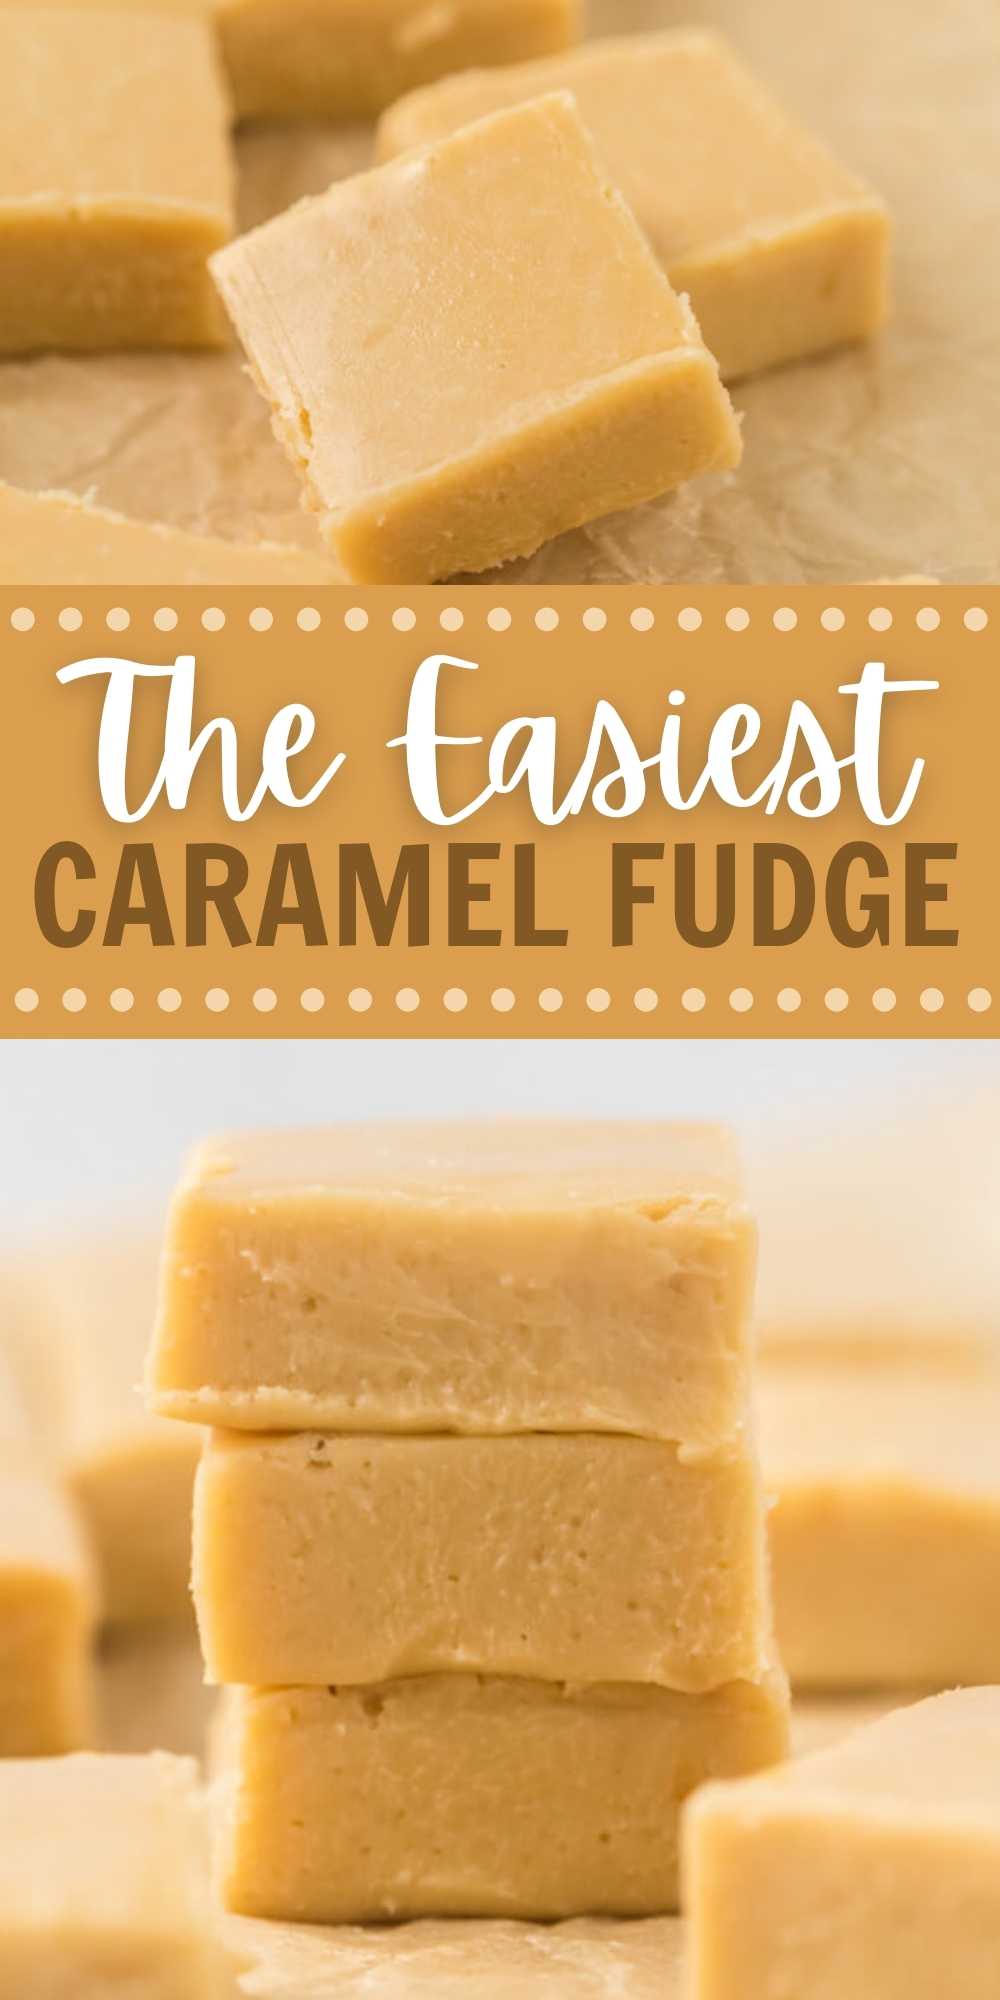 This simple to make caramel fudge recipe is sweet, creamy and a crowd pleaser. It's made with sweetened condensed milk - so there's no need for a candy thermometer! This caramel fudge is the perfect holiday dessert or gift idea! #eatingonadime #fudgerecipes #caramelrecipes #holidaydesserts 
